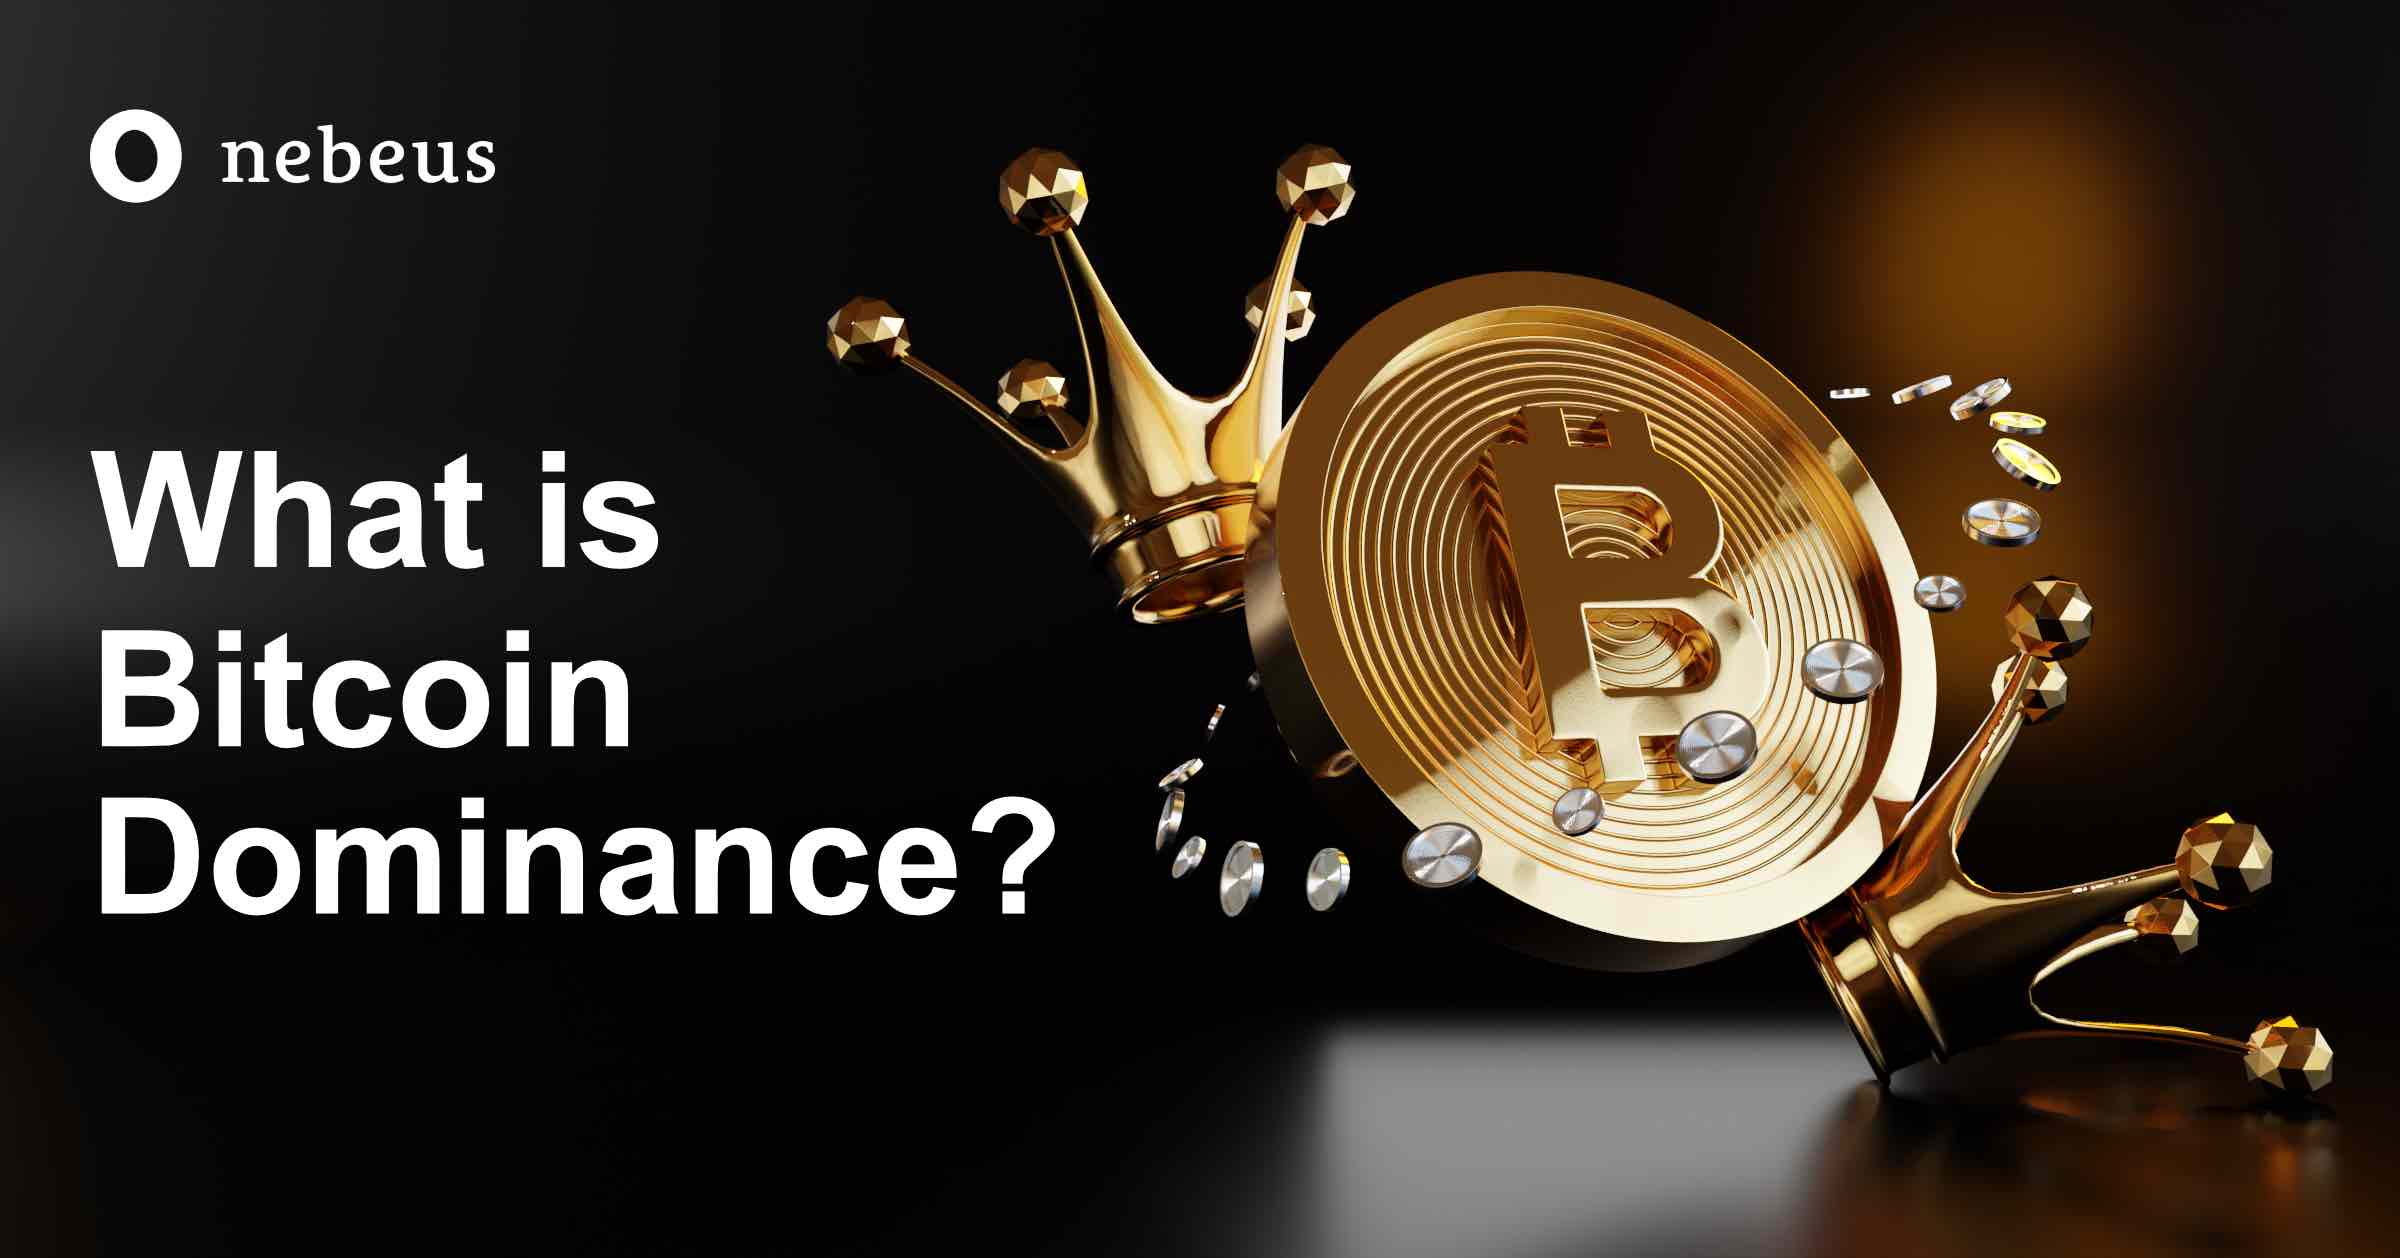 What is Bitcoin Dominance?